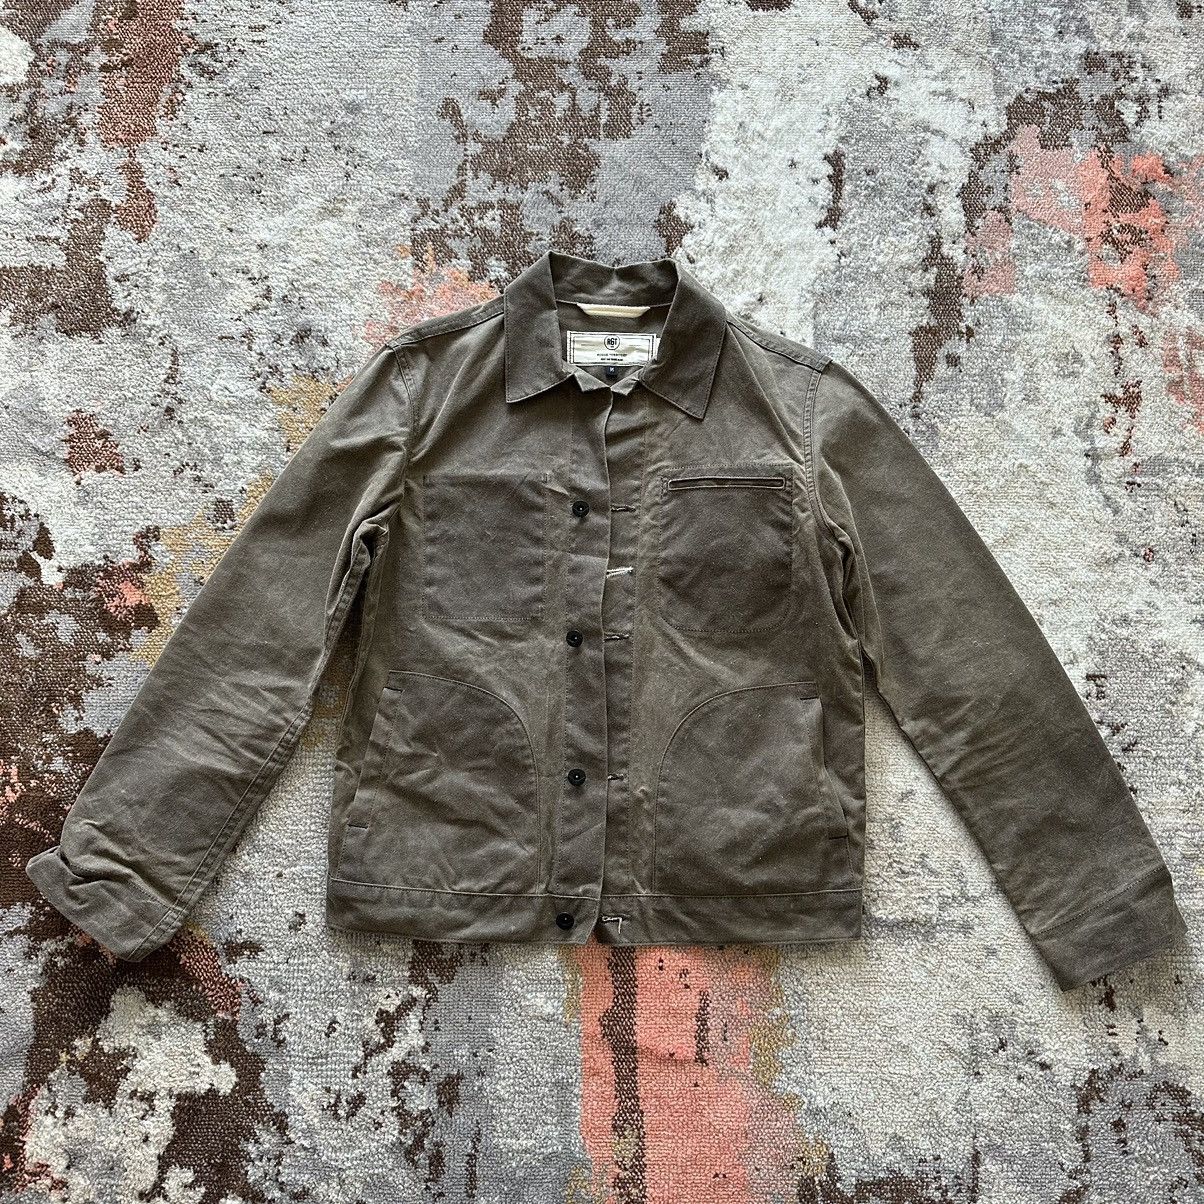 Rogue Territory Rogue Territory Supply Jacket - Brown Ridgeline Size US M / EU 48-50 / 2 - 1 Preview